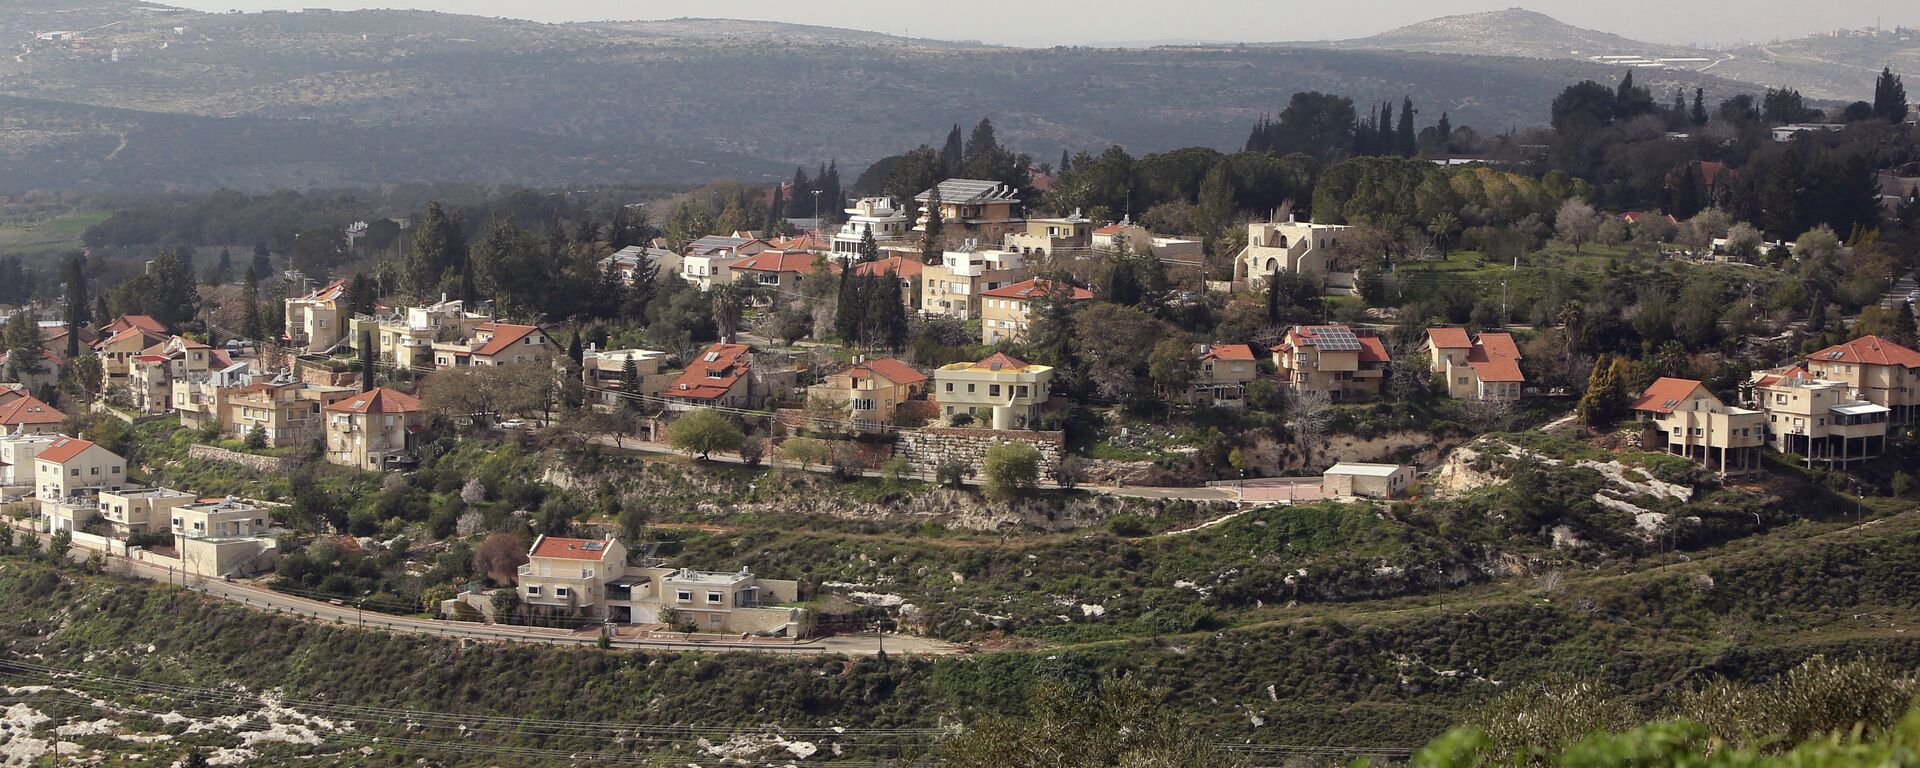 A picture shows a partial view of the Israeli settlement of Qadumim (Kedumim), near the Palestinian town of Nablus, in the Israeli-occupied West Bank, on February 9, 2015 - Sputnik Mundo, 1920, 11.04.2019